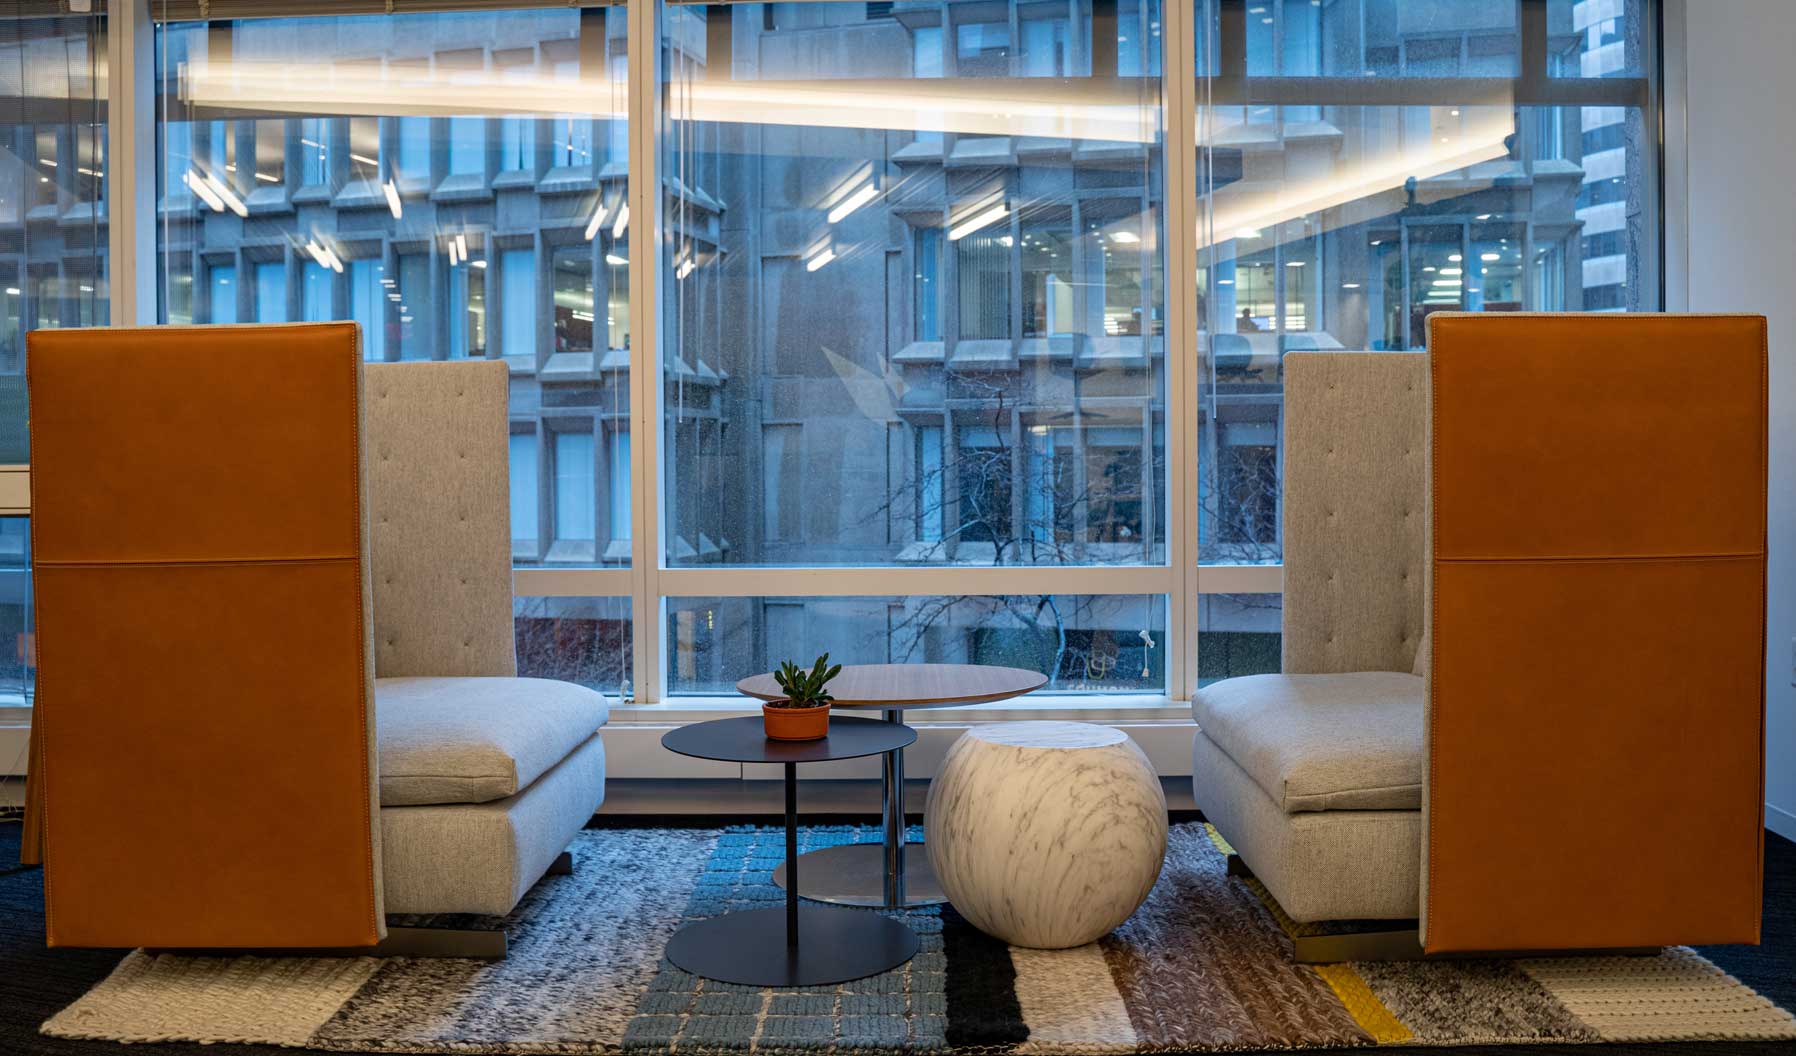 A quiet haven that rejuvenation accommodates 2-4 people to collaborate or chat together in an alternative setting. Built -in privacy with the high sides of the Gran Torino and views of Boston’s financial district enable tranquility and rejuvenation.